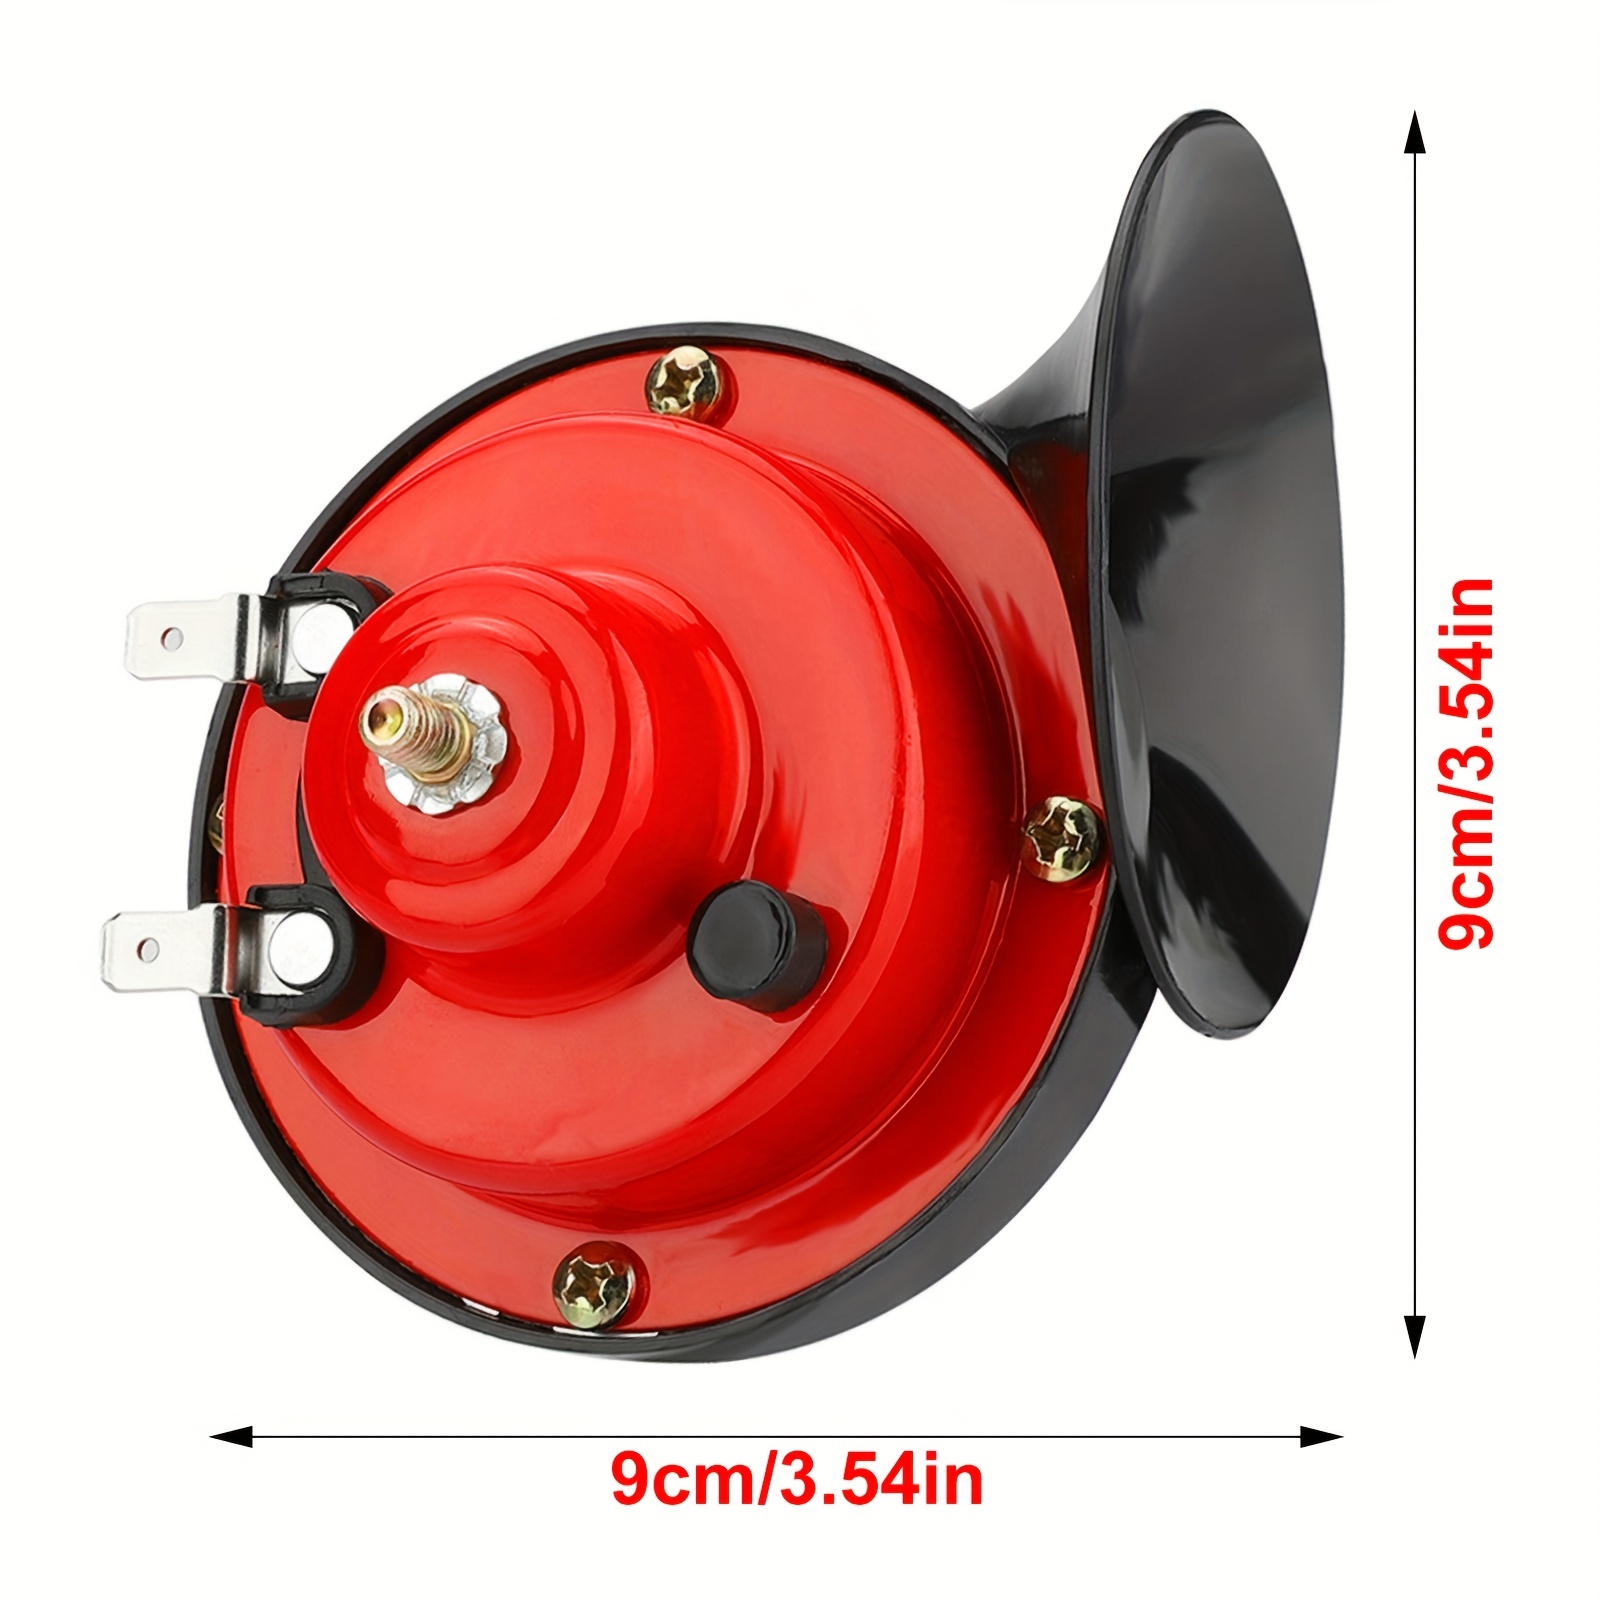 Hot Item] Hot Selling Auto Parts Electric Horn Universal Type Snail Horn  12V Fanfare Car Horns